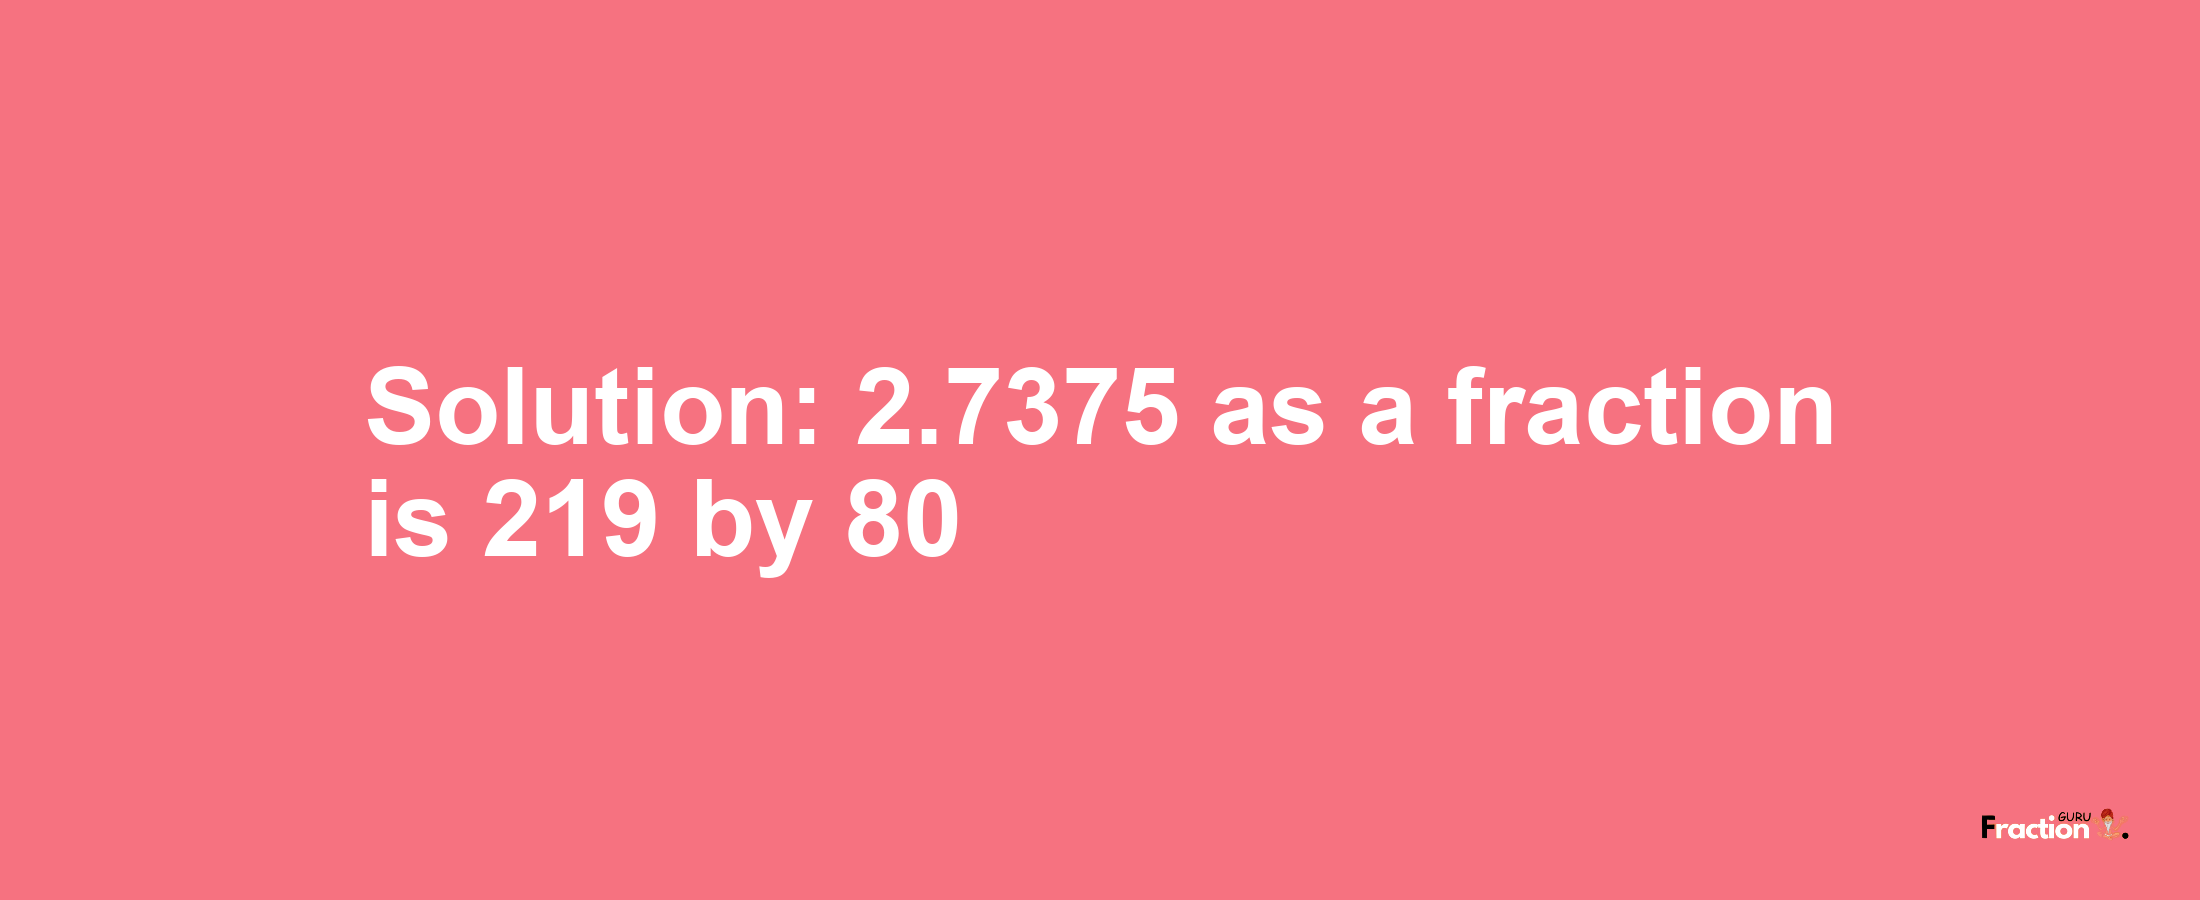 Solution:2.7375 as a fraction is 219/80